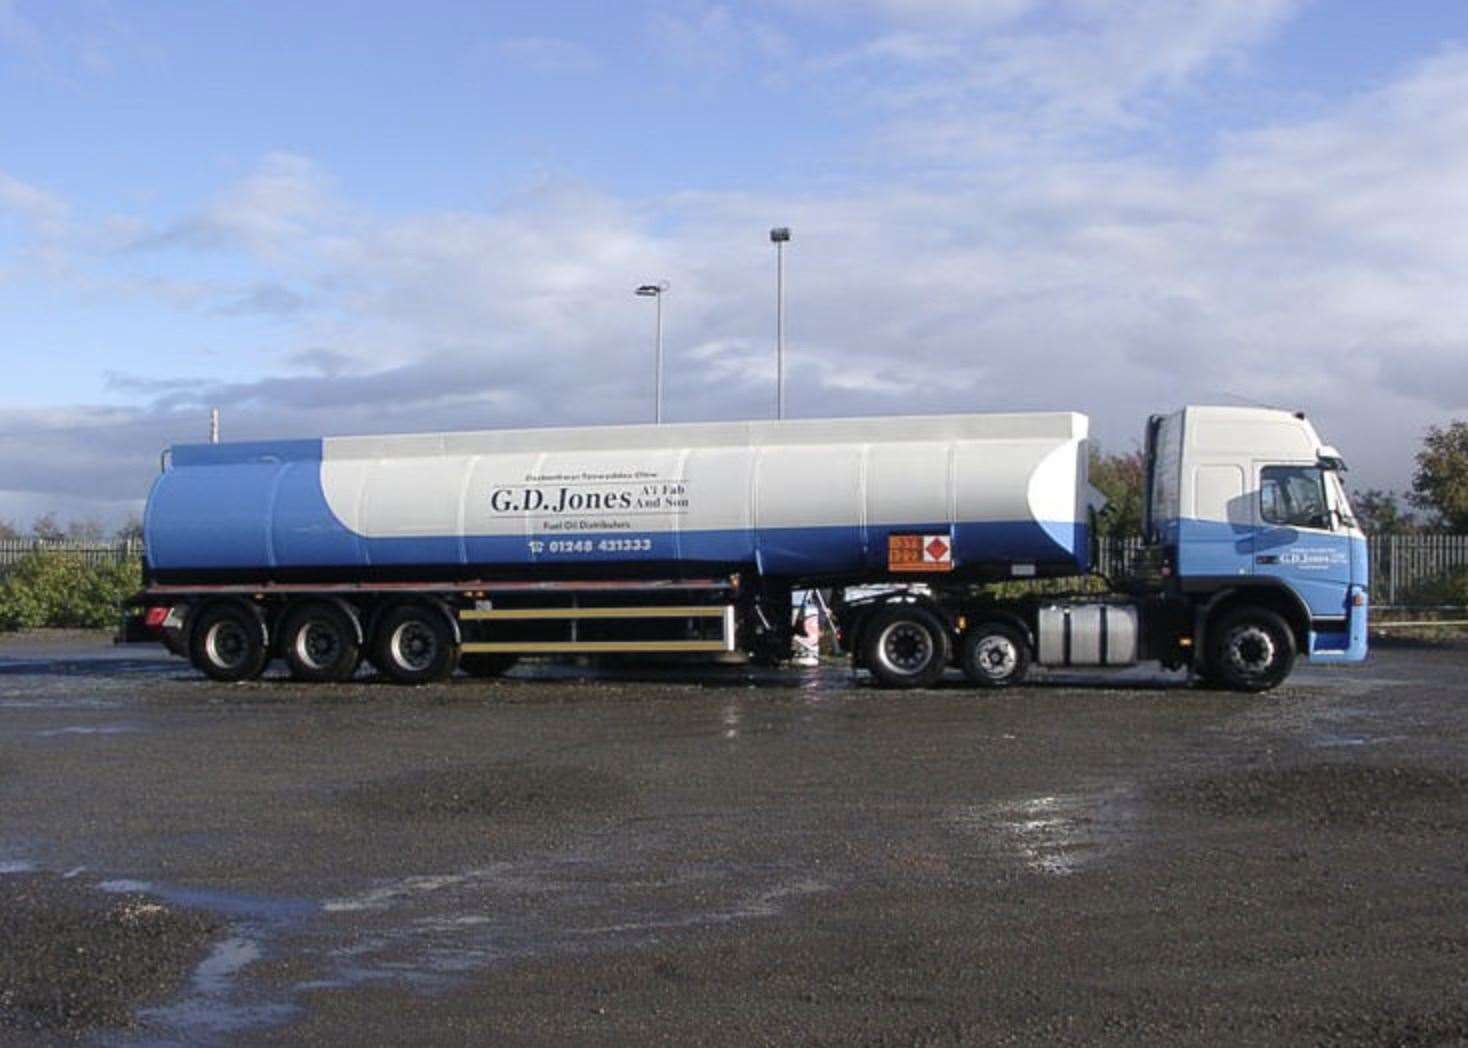 It is believed that the hydrogen gas will be transported by 44 tonne trucks like this, albeit in tubes rather than a single container.